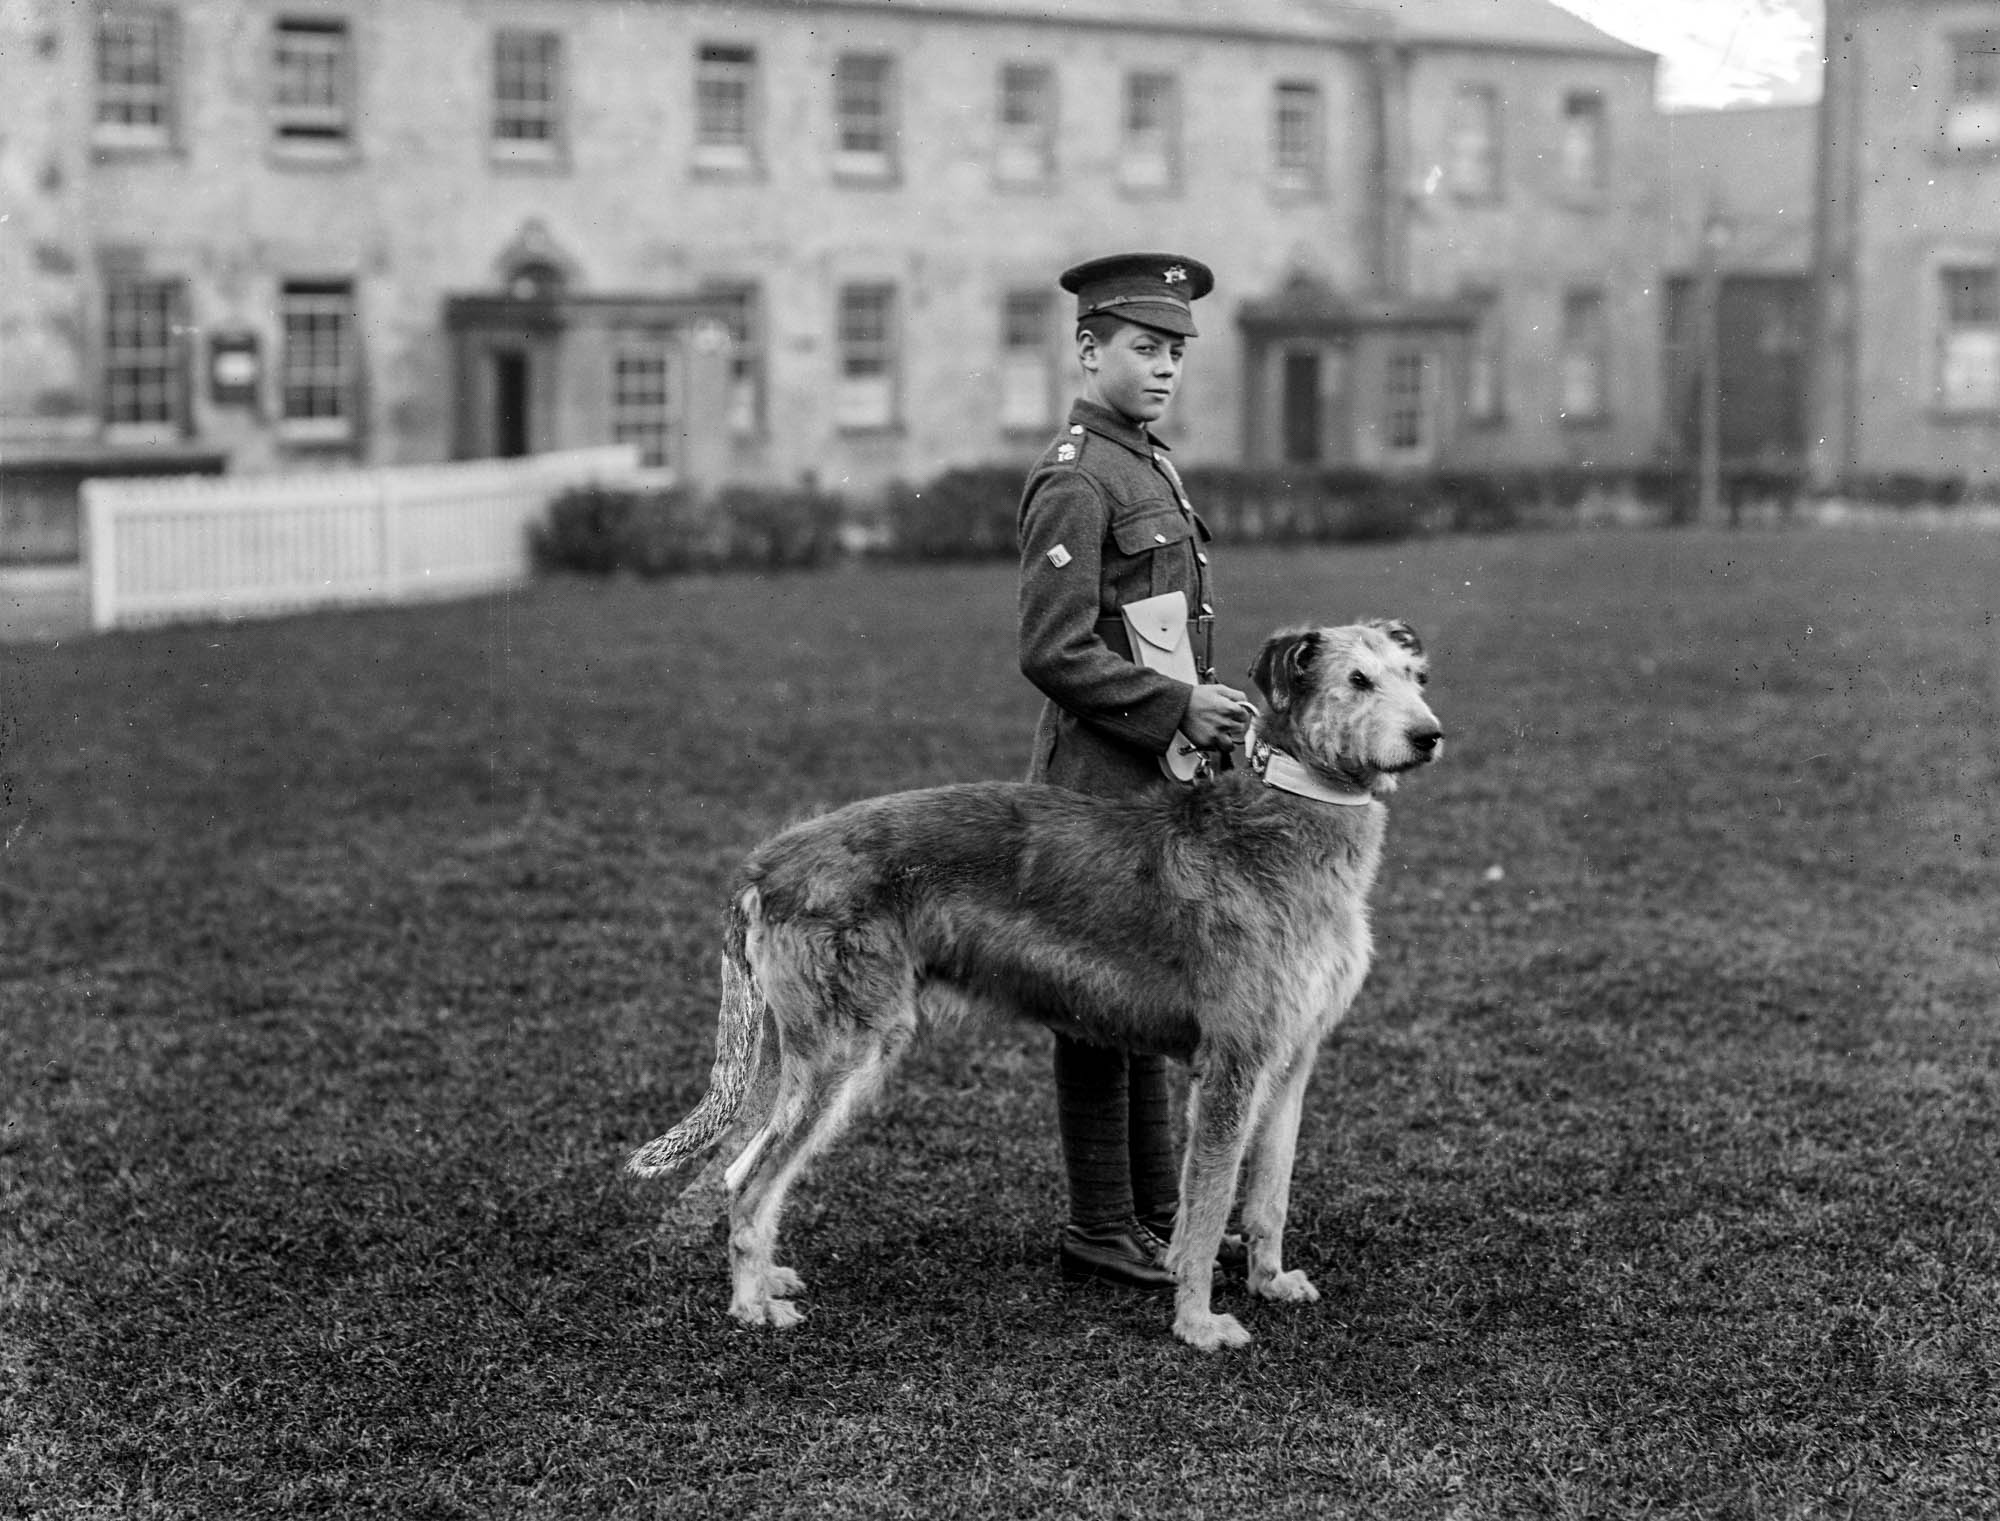 Young soldier in black and white photo with Irish wolfhound